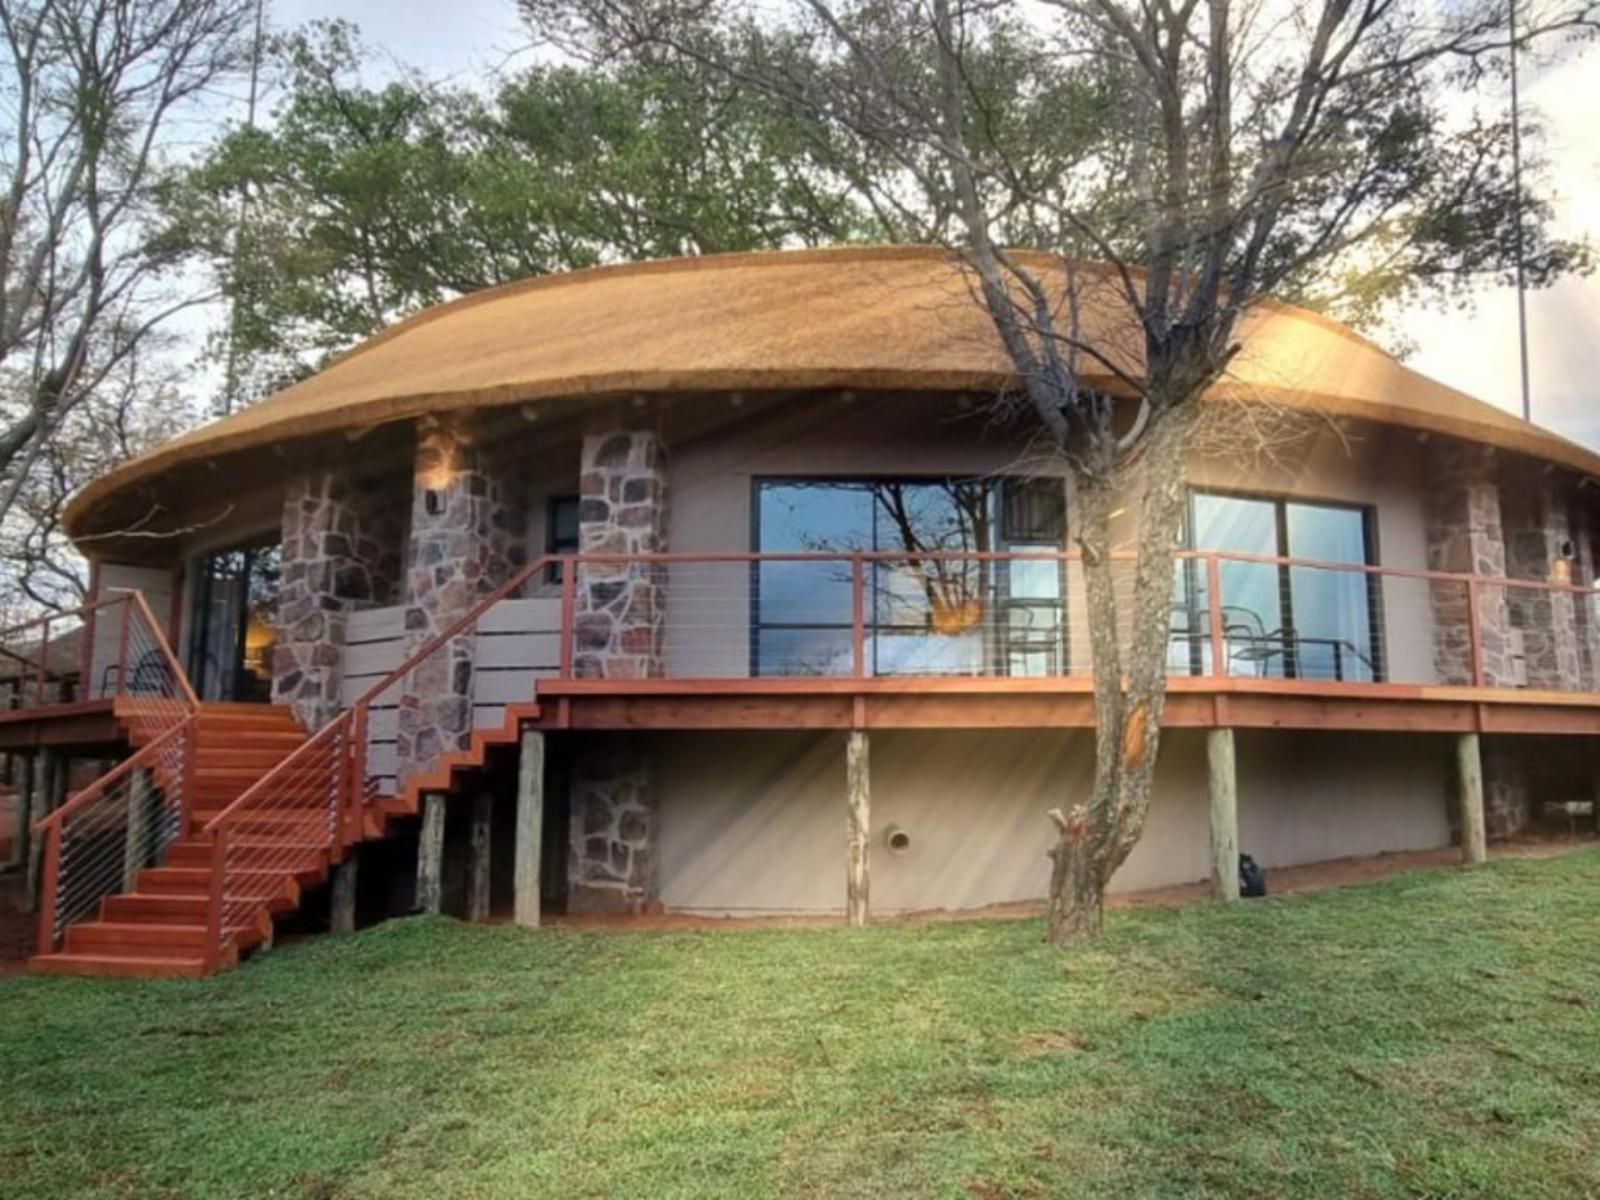 Nyati Wilderness Vaalwater Limpopo Province South Africa Cabin, Building, Architecture, House